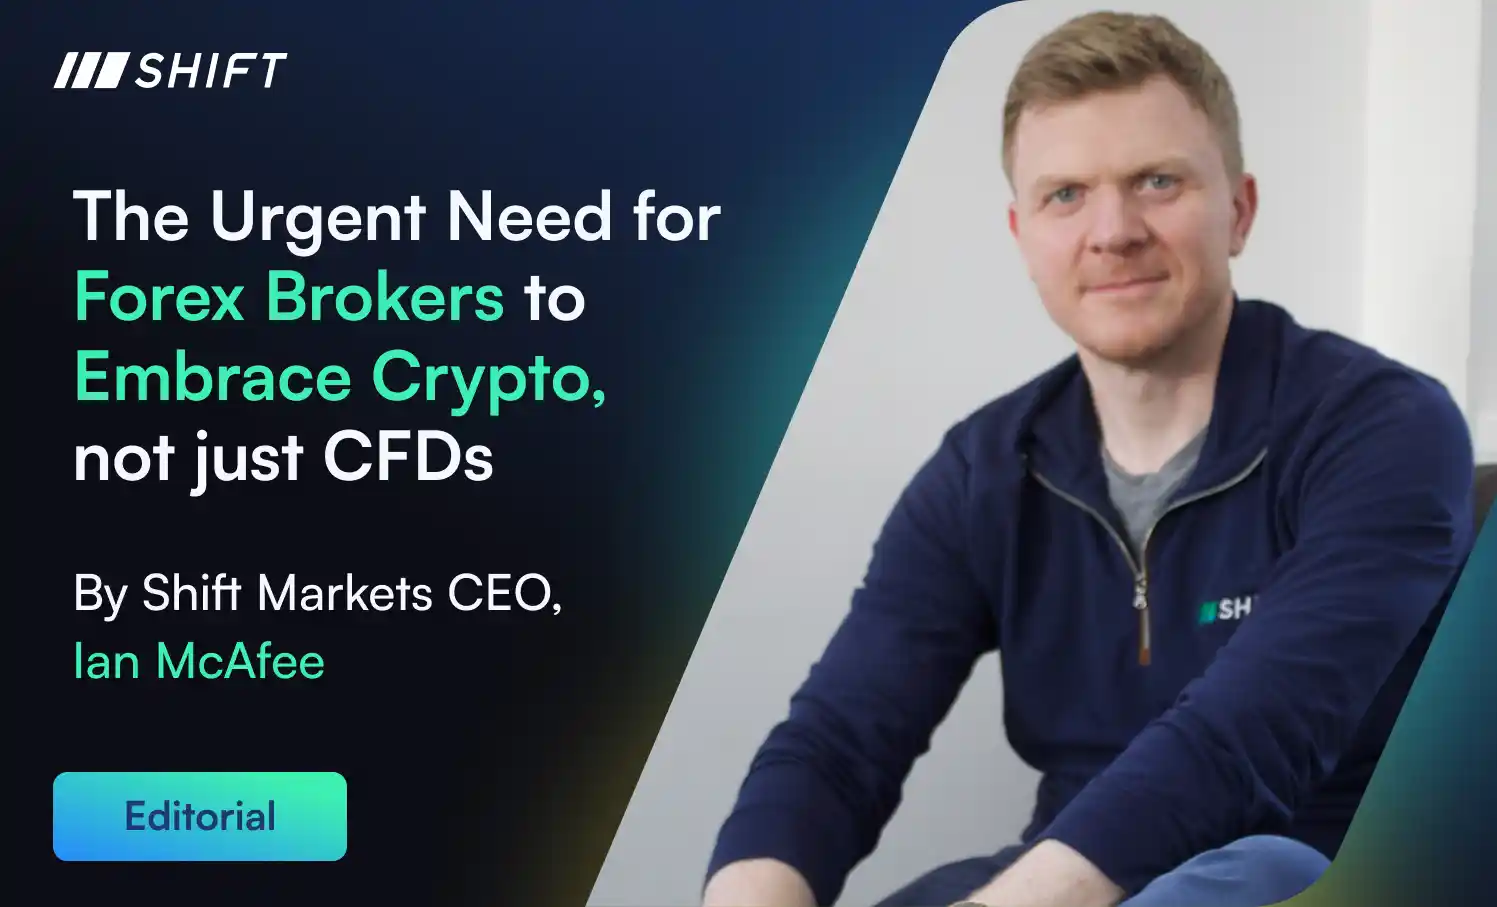 The-Urgent-Need-for-FX-Brokers-to-Embrace-Crypto